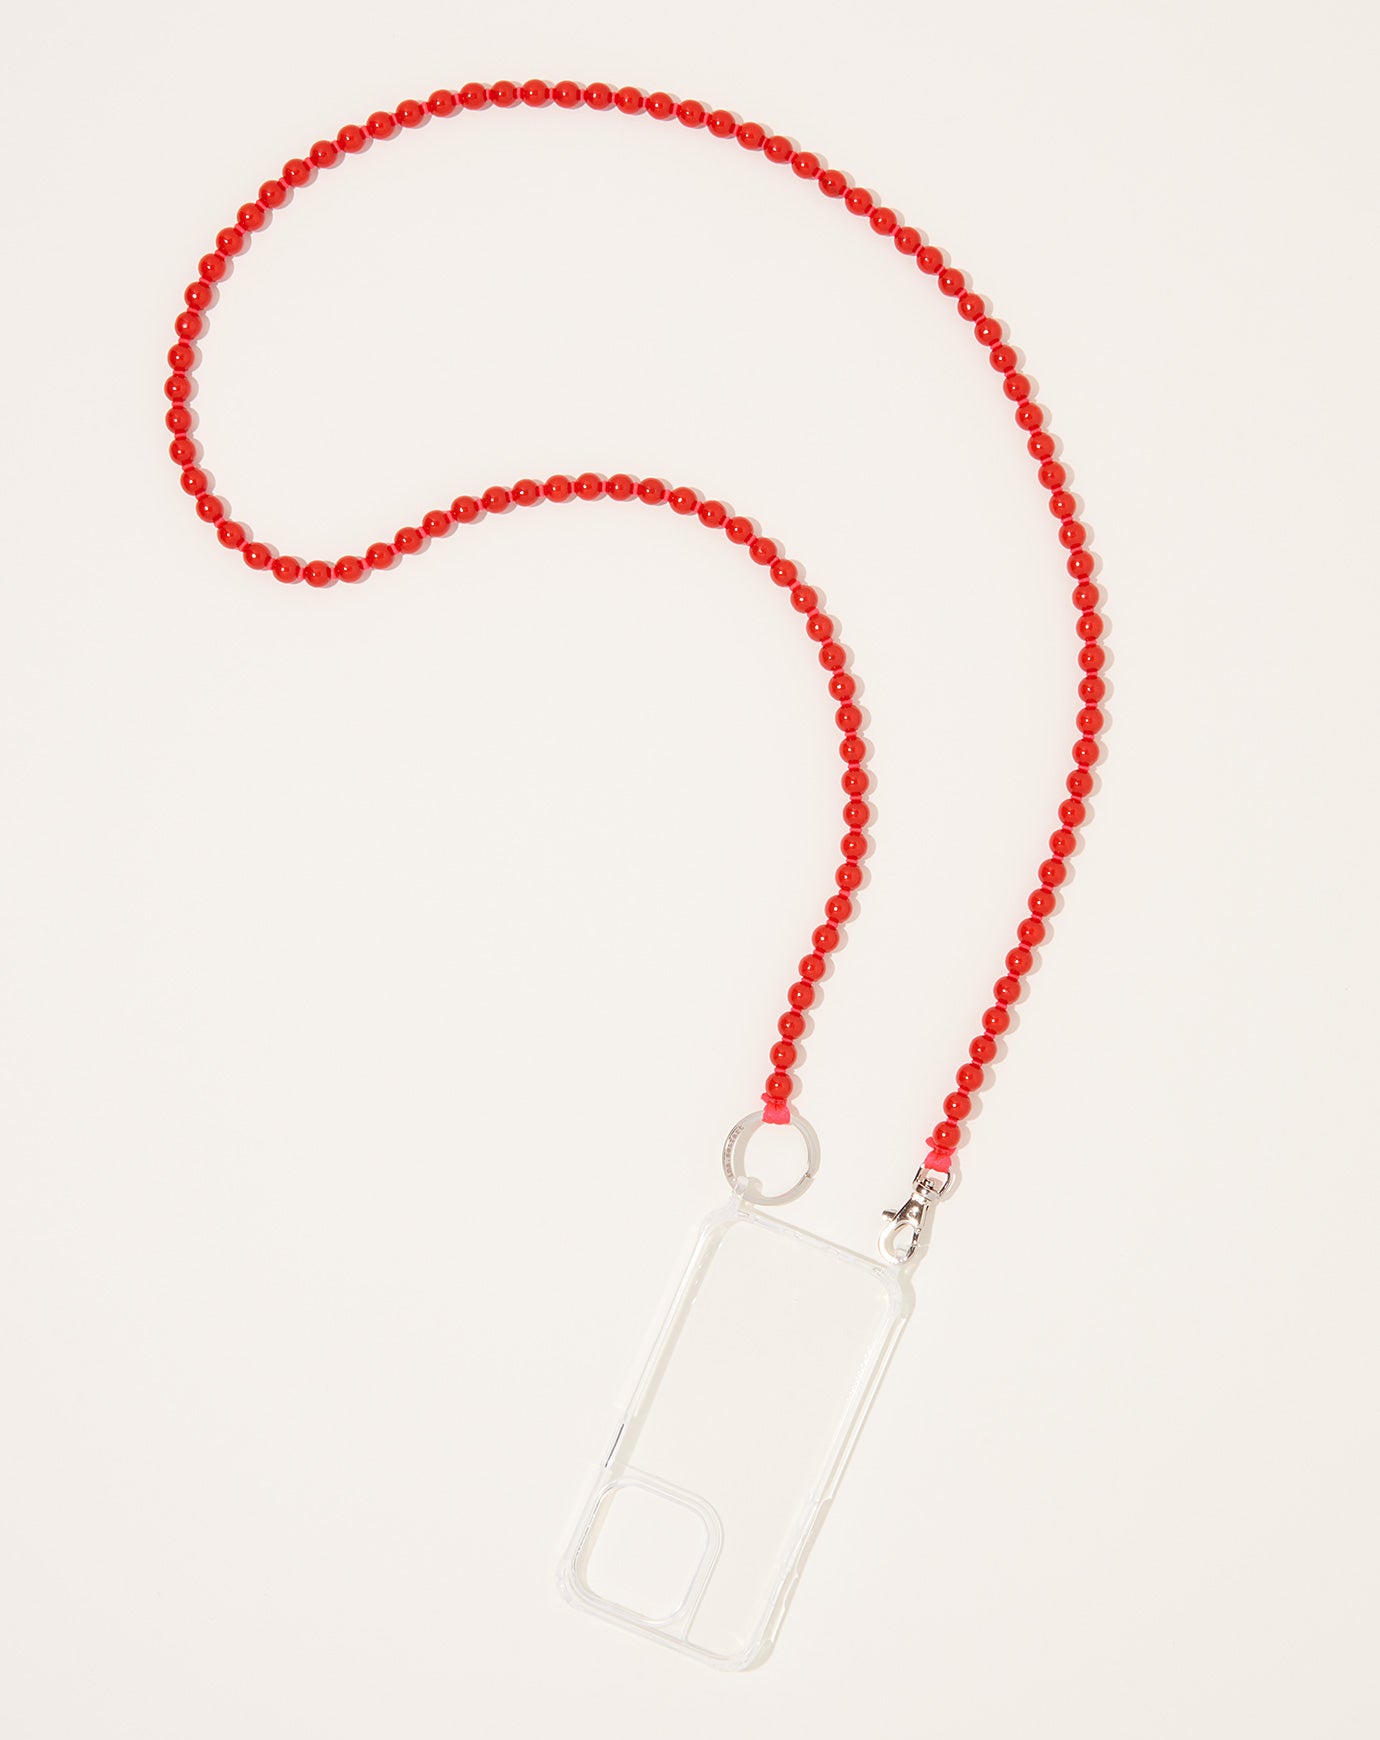 Ina Seifart Handykette iPhone Necklace in Red